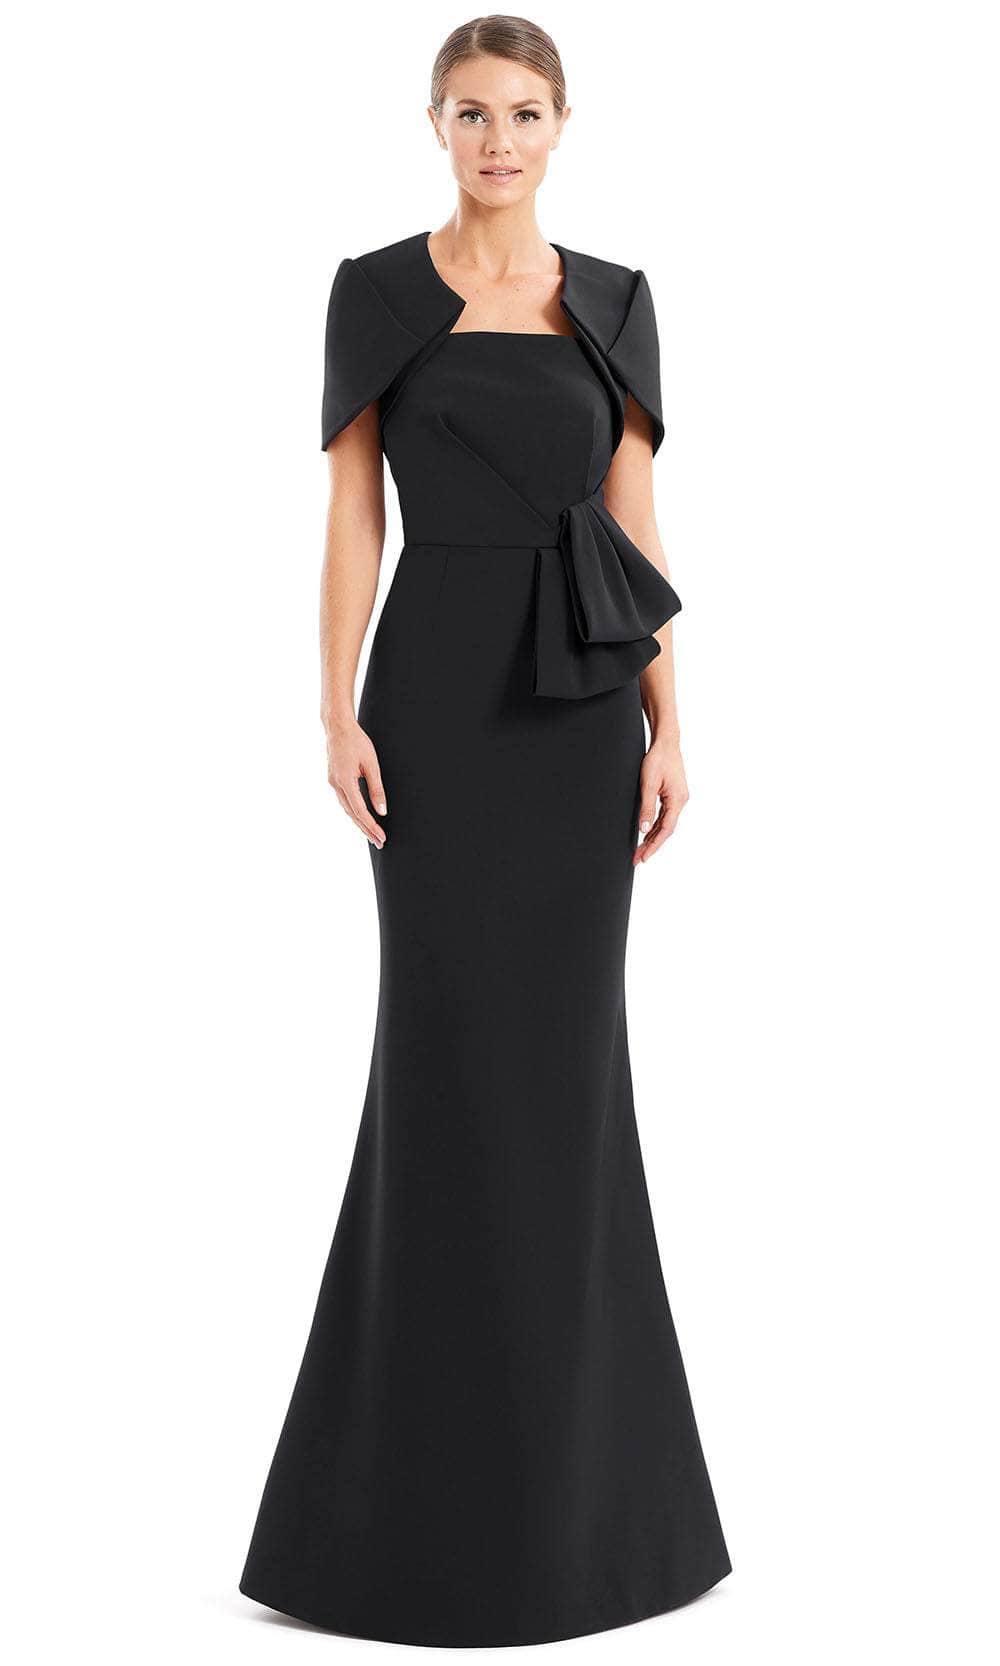 Alexander By Daymor 1656F22 - Strapless Peplum Formal Gown With Jacket Special Occasion Dress 4 / Black